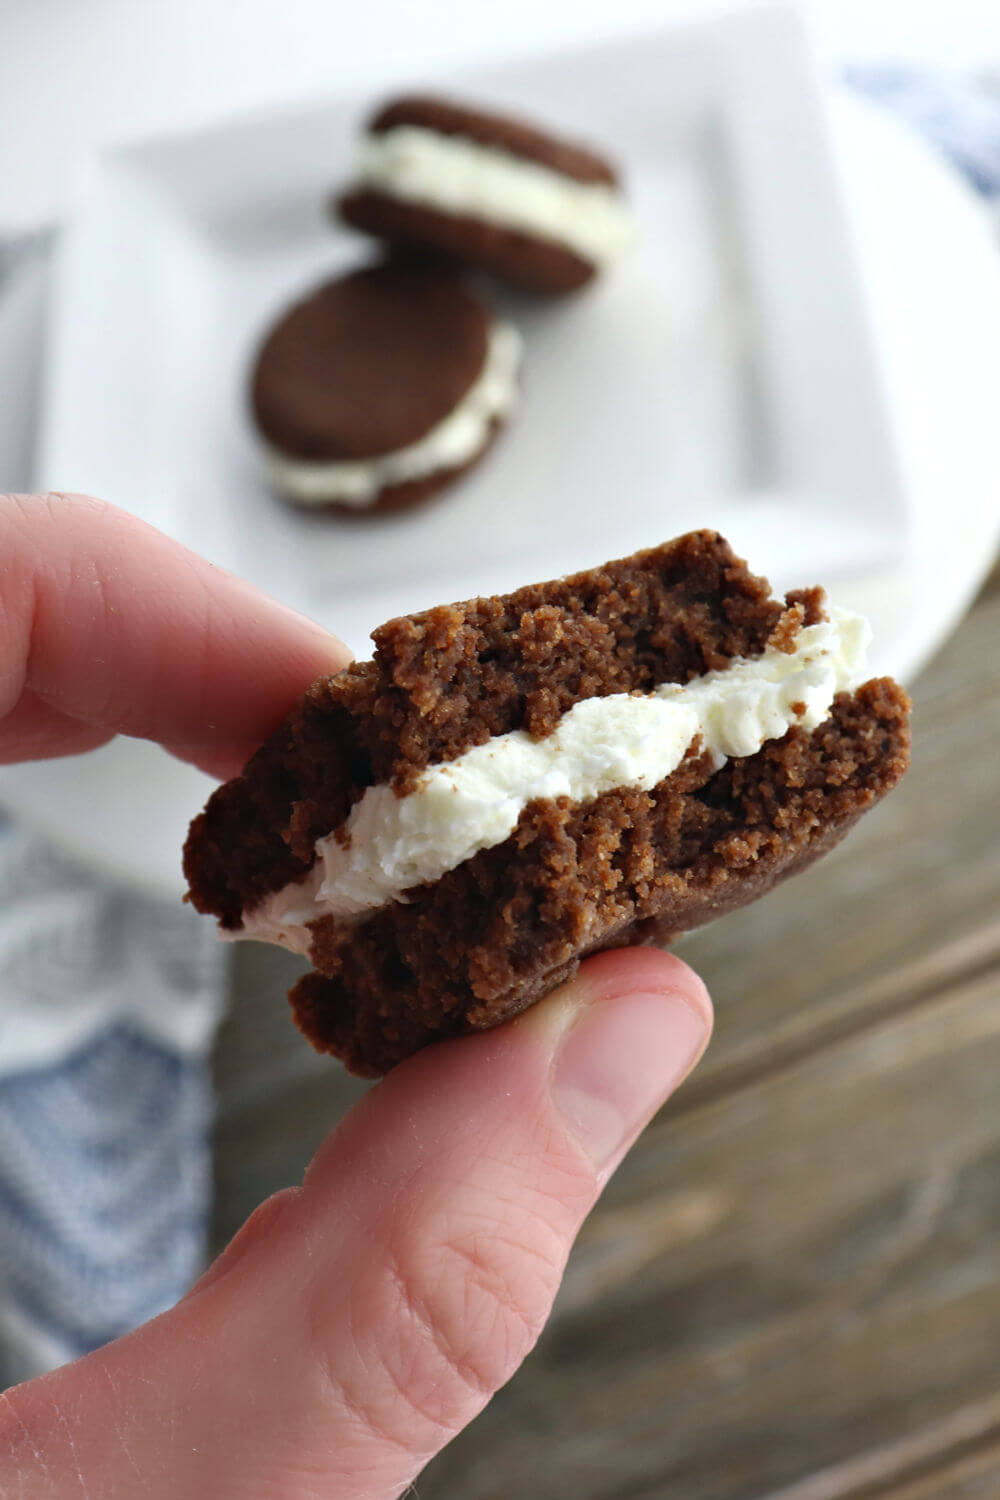 Take a bite of a low carb keto chocolate sandwich cookie and your taste buds will thank you. A perfect gluten-free snack with a sugar-free decadent filling. #ketosnacks #ketodesserts #lowcarbdessertsketo